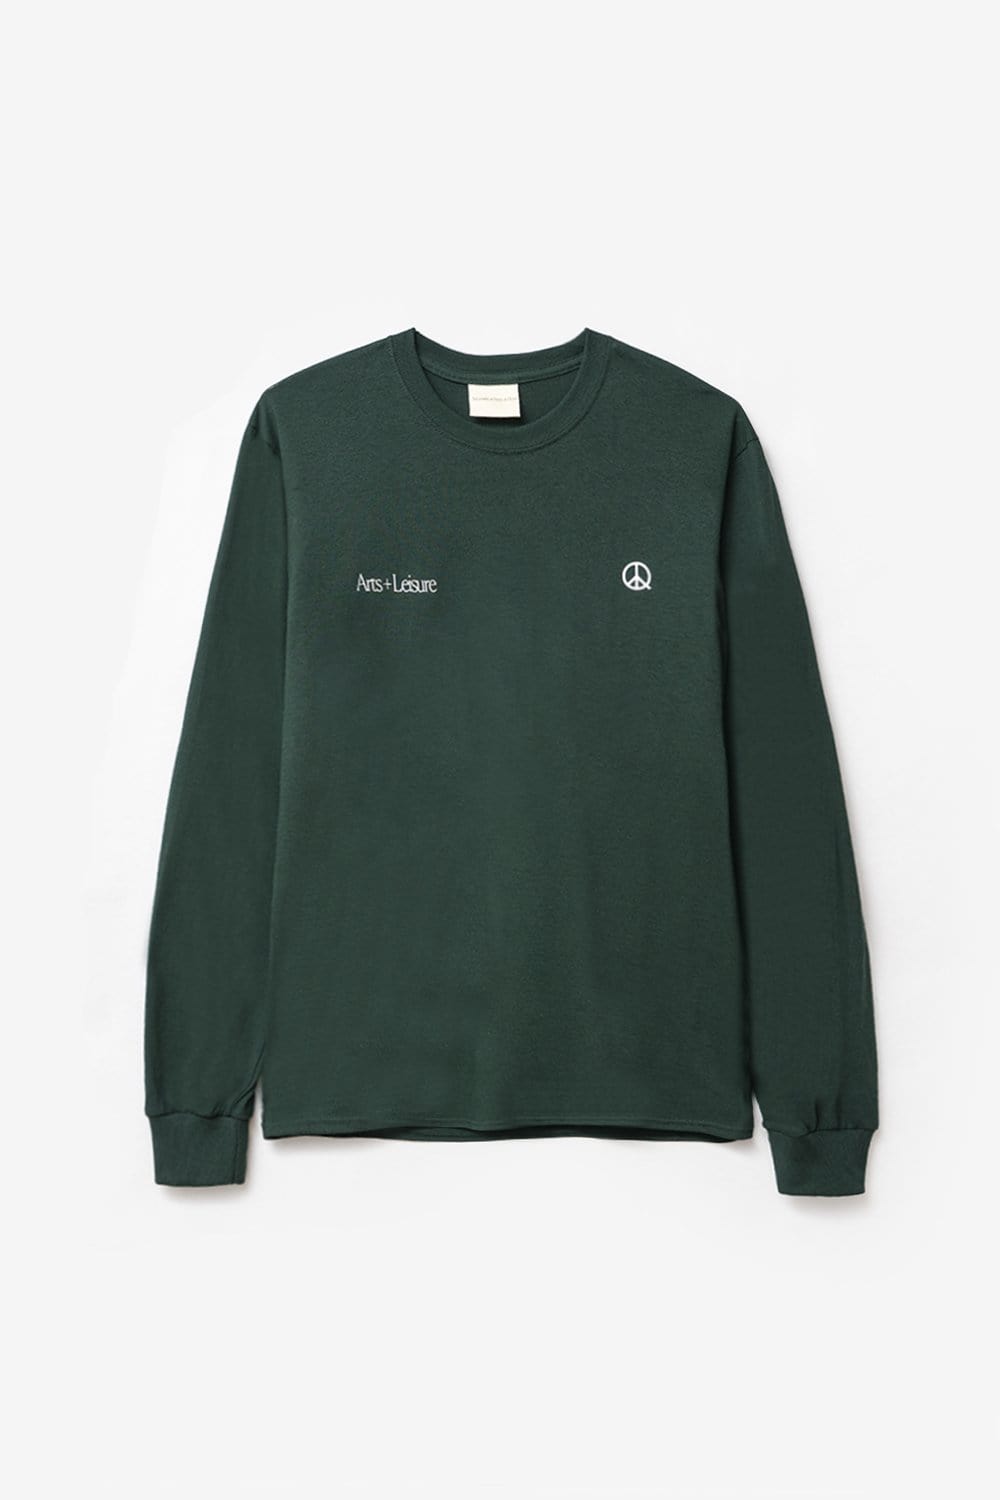 Museum of Peace & Quiet Arts + Leisure Longsleeve Tee (Forest)